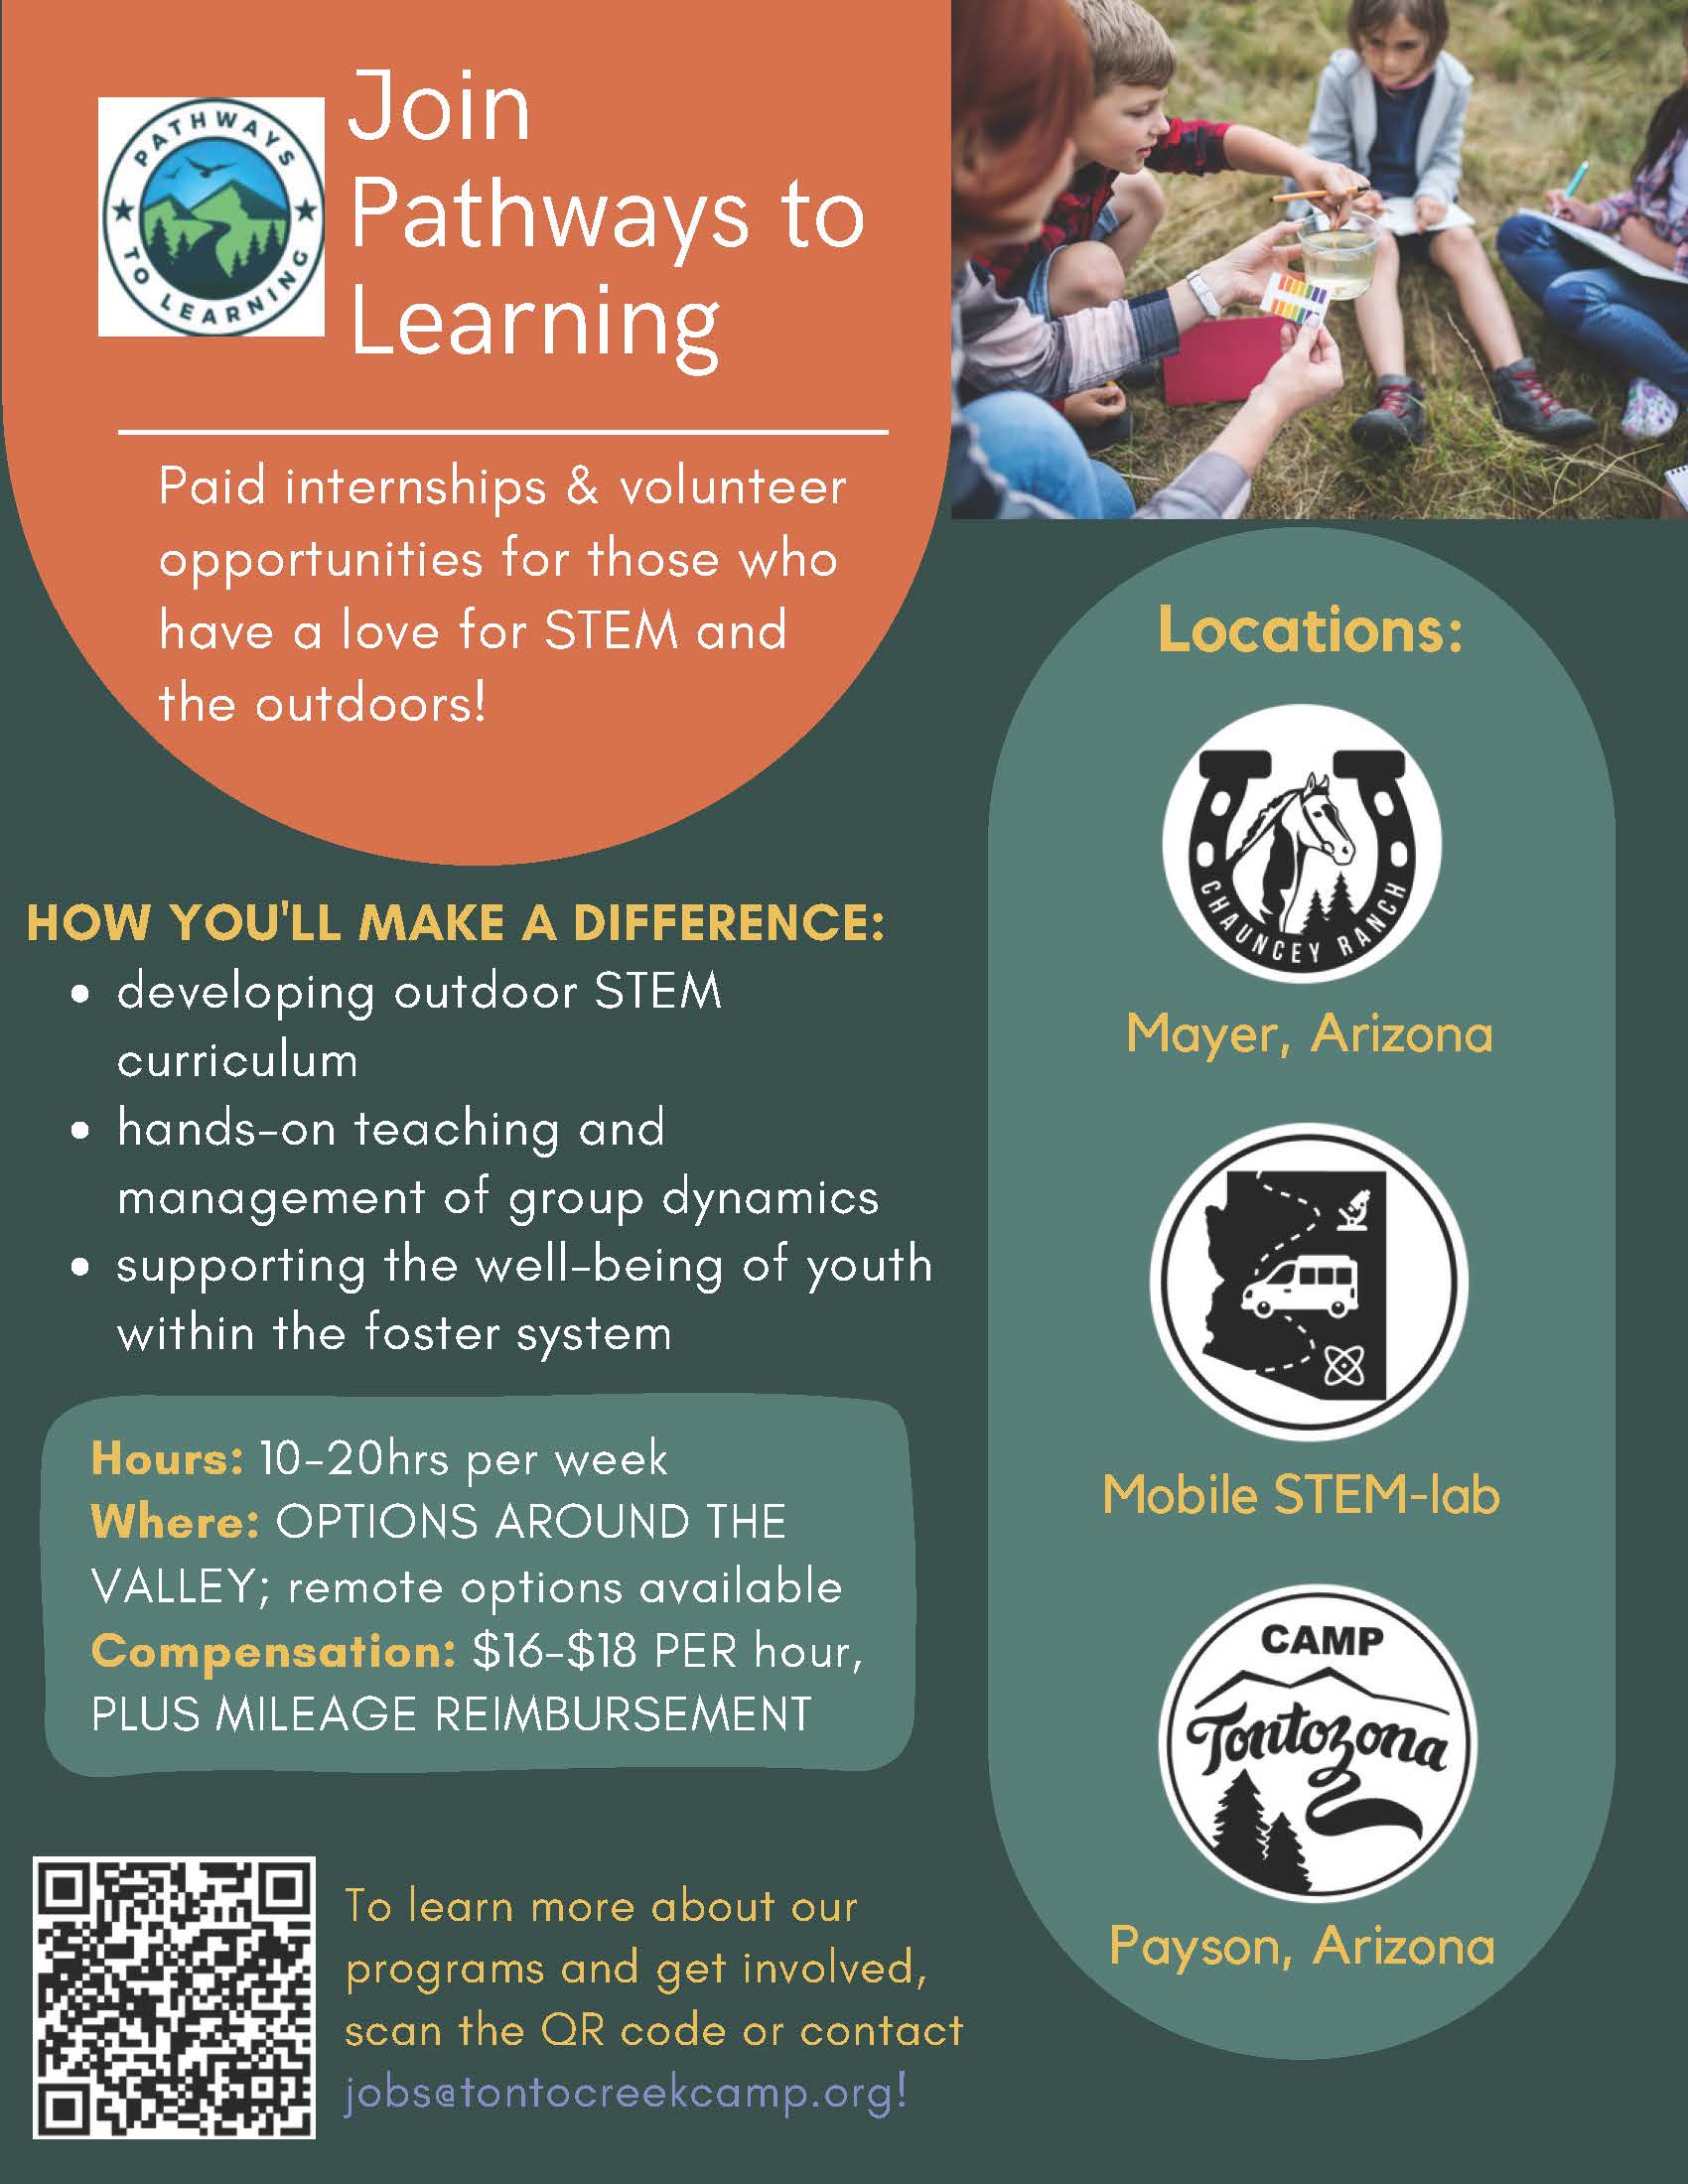 How you'll make a difference: developing outdoor STEM curriculum hands-on teaching and management of group dynamics supporting the well-being of youth within the foster system. Hours: 10-20hrs per week Where: OPTIONS AROUND THE VALLEY; remote options available Compensation: $16-$18 PER hour, PLUS MILEAGE REIMBURSEMENTTo learn more about our programs and get involved, scan the QR code or contact jobs@tontocreekcamp.org!